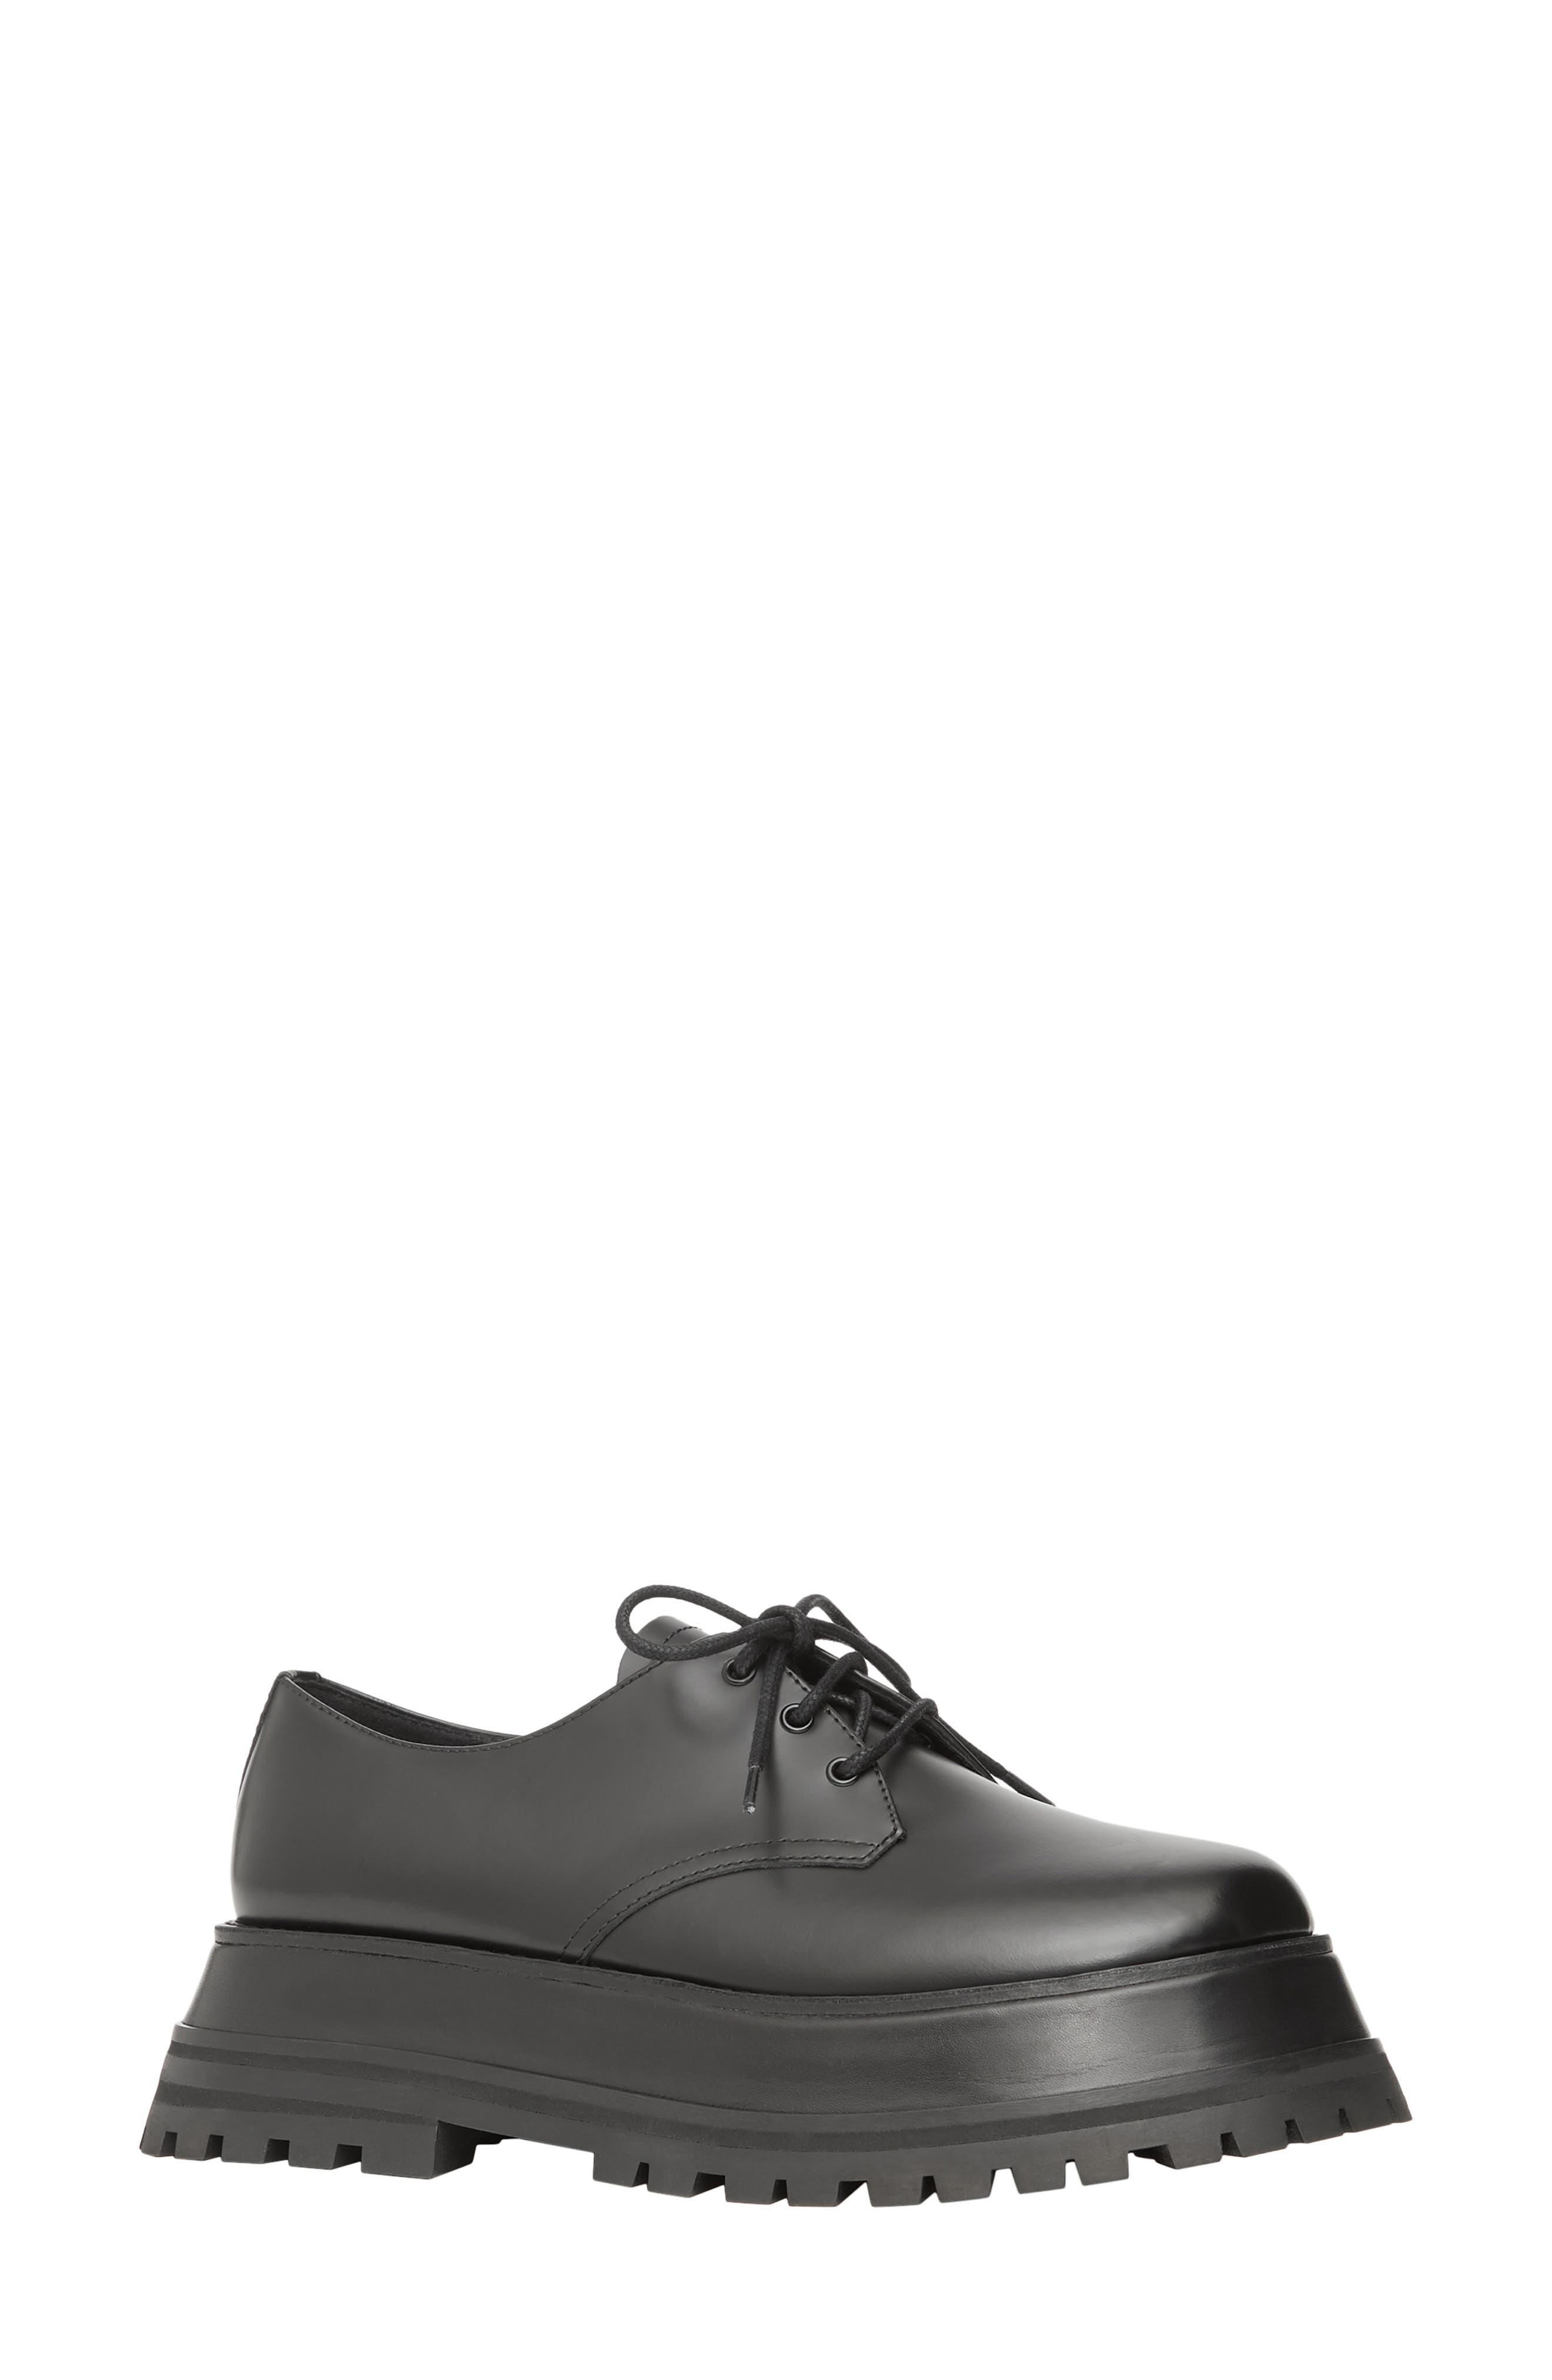 burberry shoes womens nordstrom